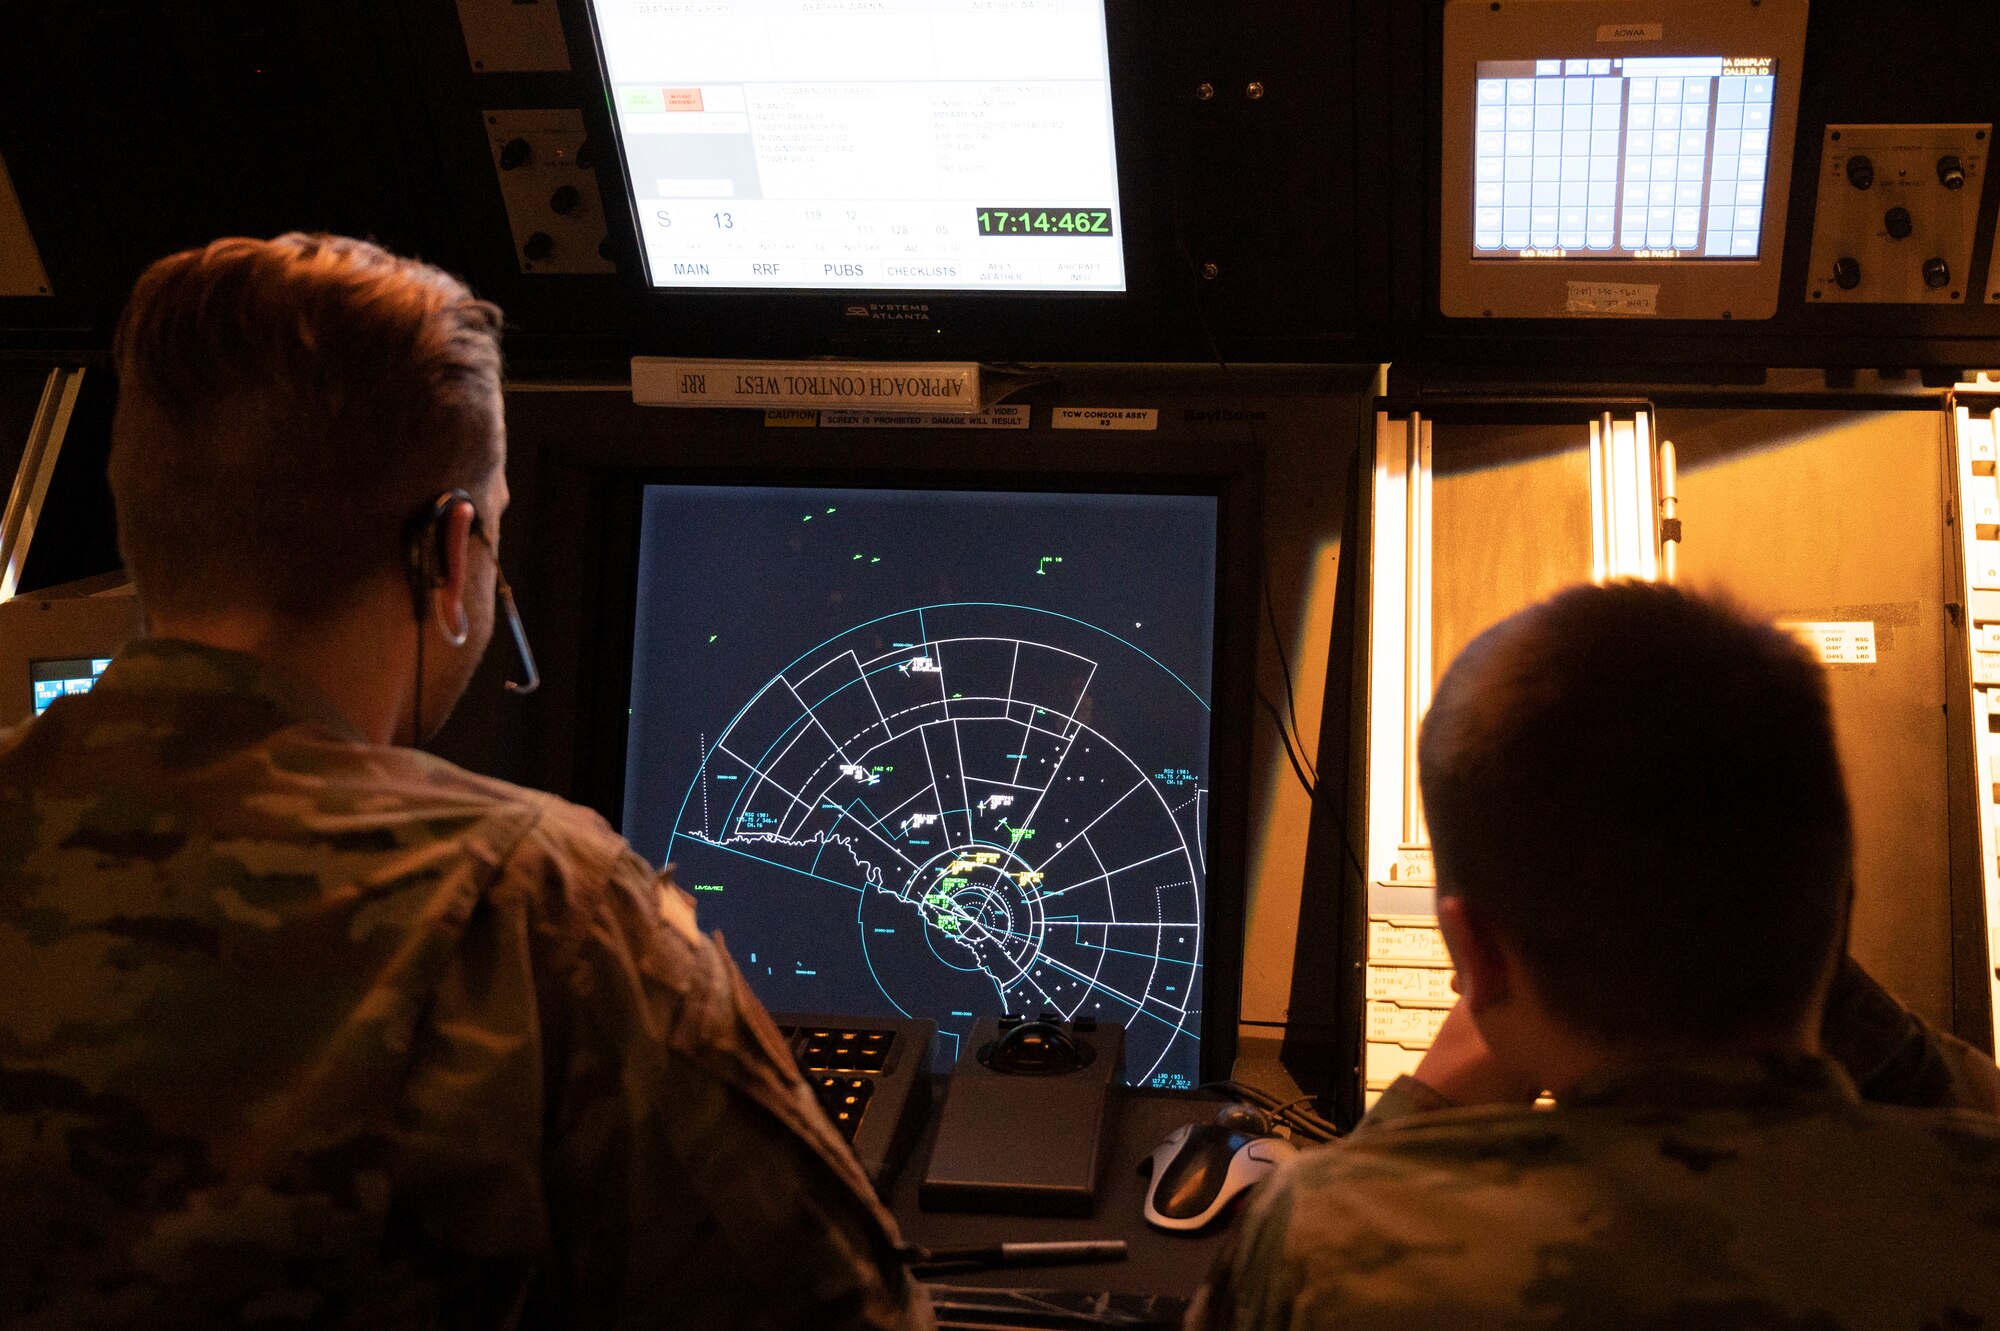 U.S. Air Force Airman 1st Class Christopher Morley (left), and Airman 1st Class Caze Bradley (right), 47th Operations Support Squadron air traffic controllers, work together during a simulated air traffic control session at Laughlin Air Force Base, Texas, May 4, 2022. The simulator allows Airmen to train for day-to-day air traffic scenarios without the stress of real-world situations. (U.S. Air Force photo by Airman 1st Class Kailee Reynolds)